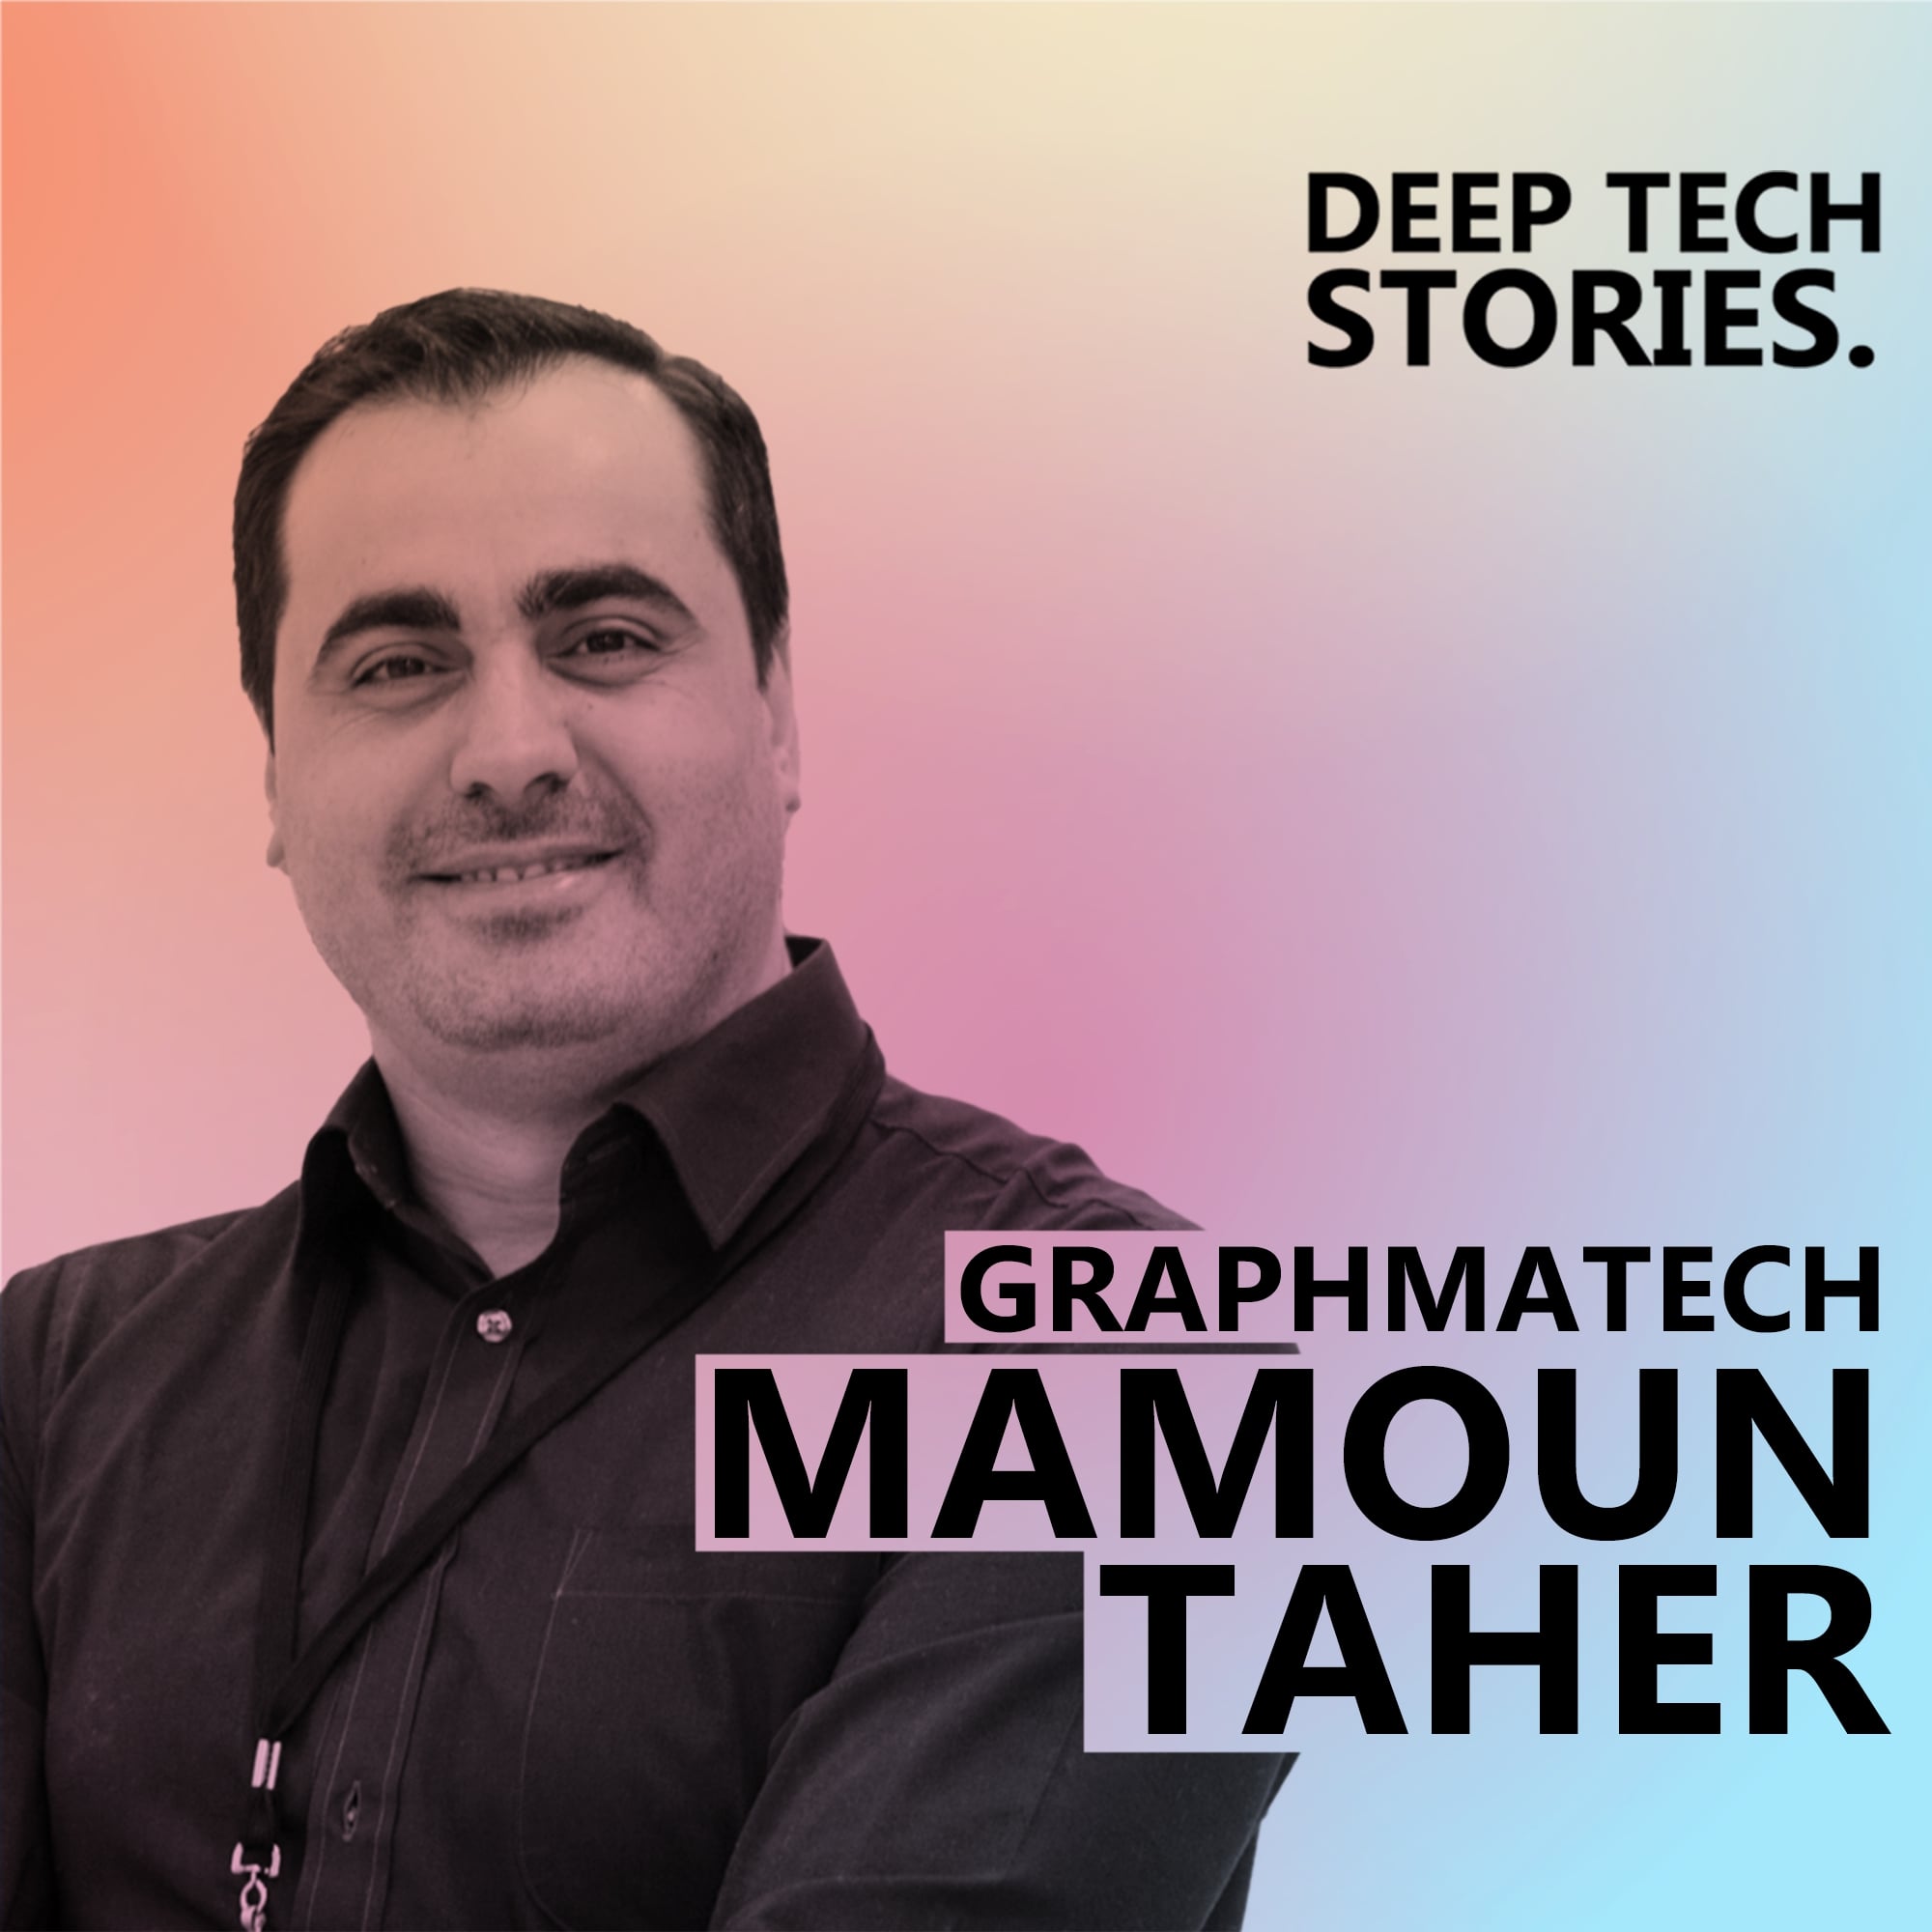 Graphmatech CEO Mamoun Taher on Graphene as a revolution in Material Science Image